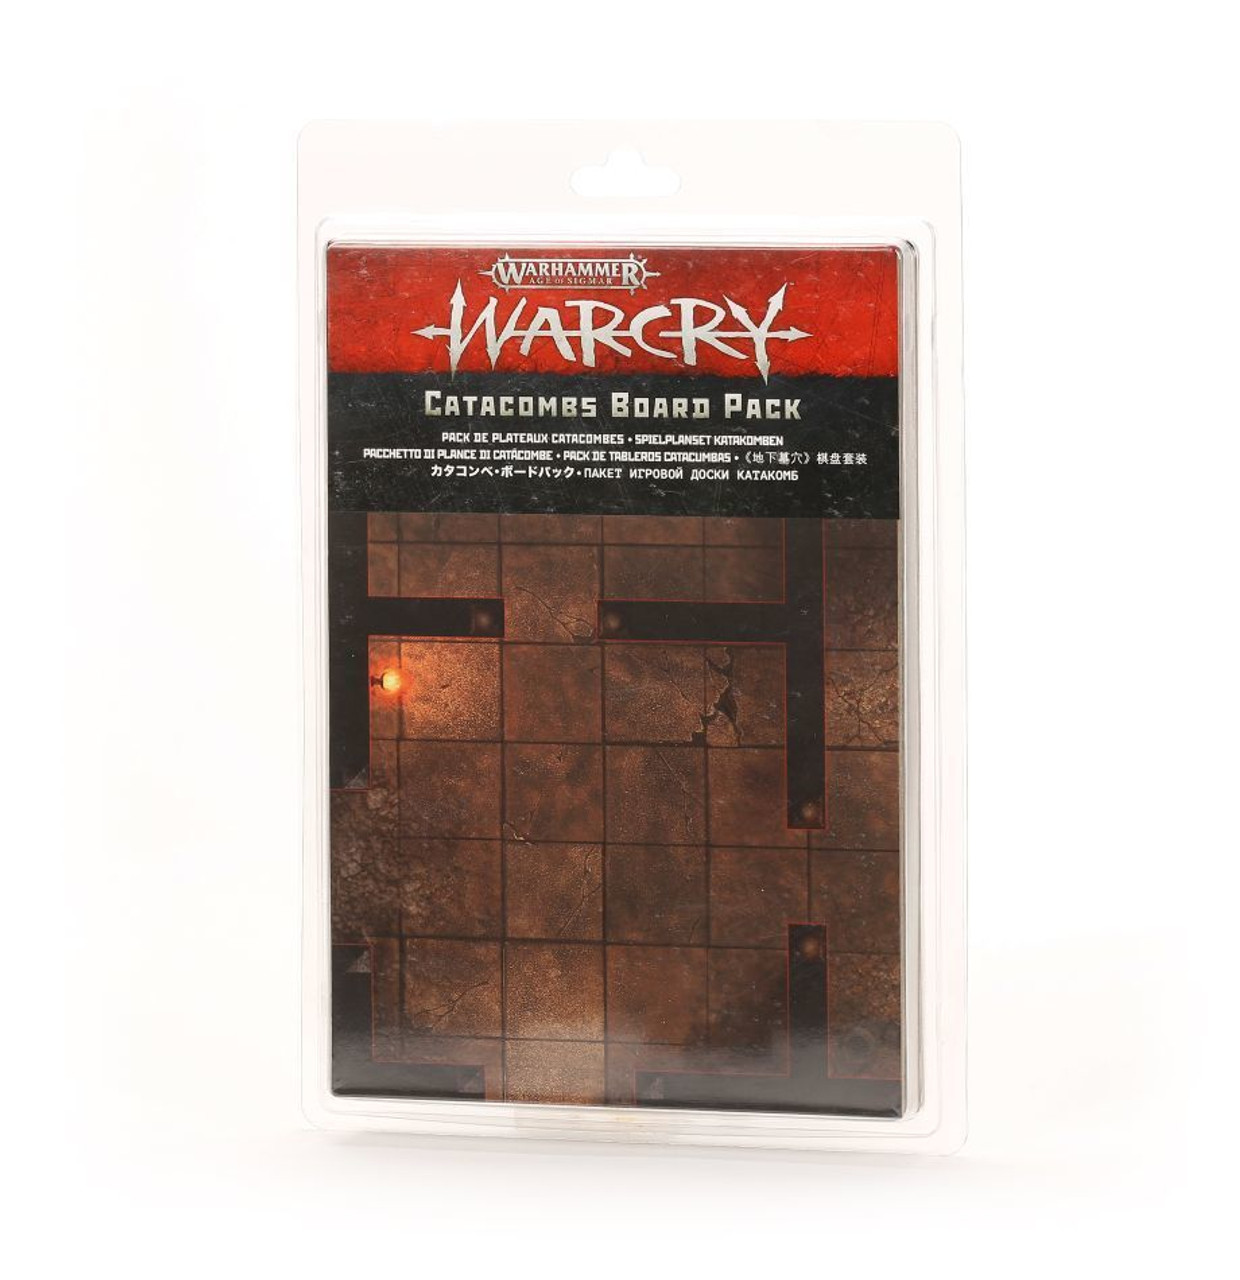 111-70 WARCRY: CATACOMBS BOARD PACK